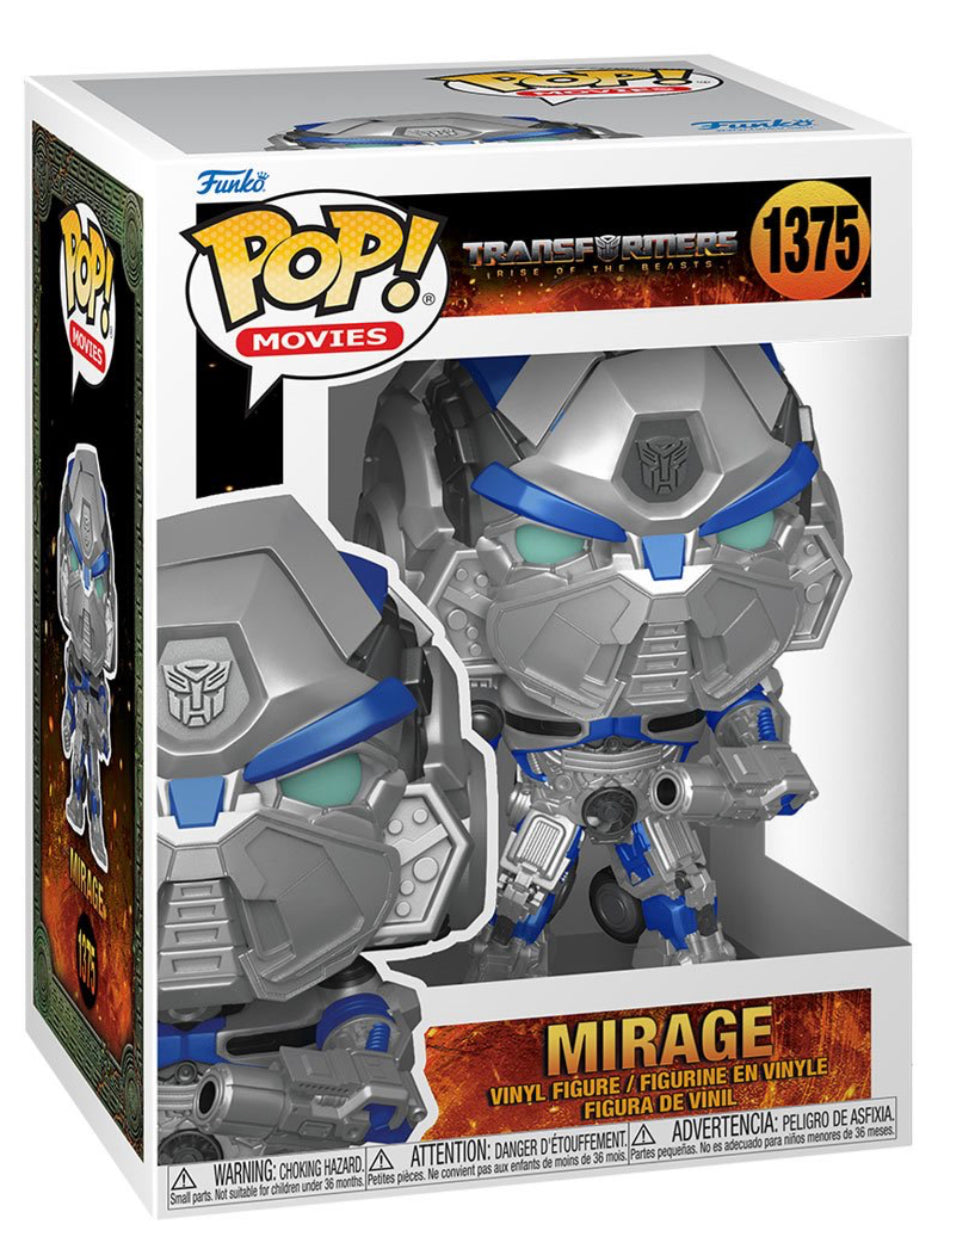 Transformers: Rise of the Beasts Mirage #1375 Funko Pop! Vinyl Figure (Movies)